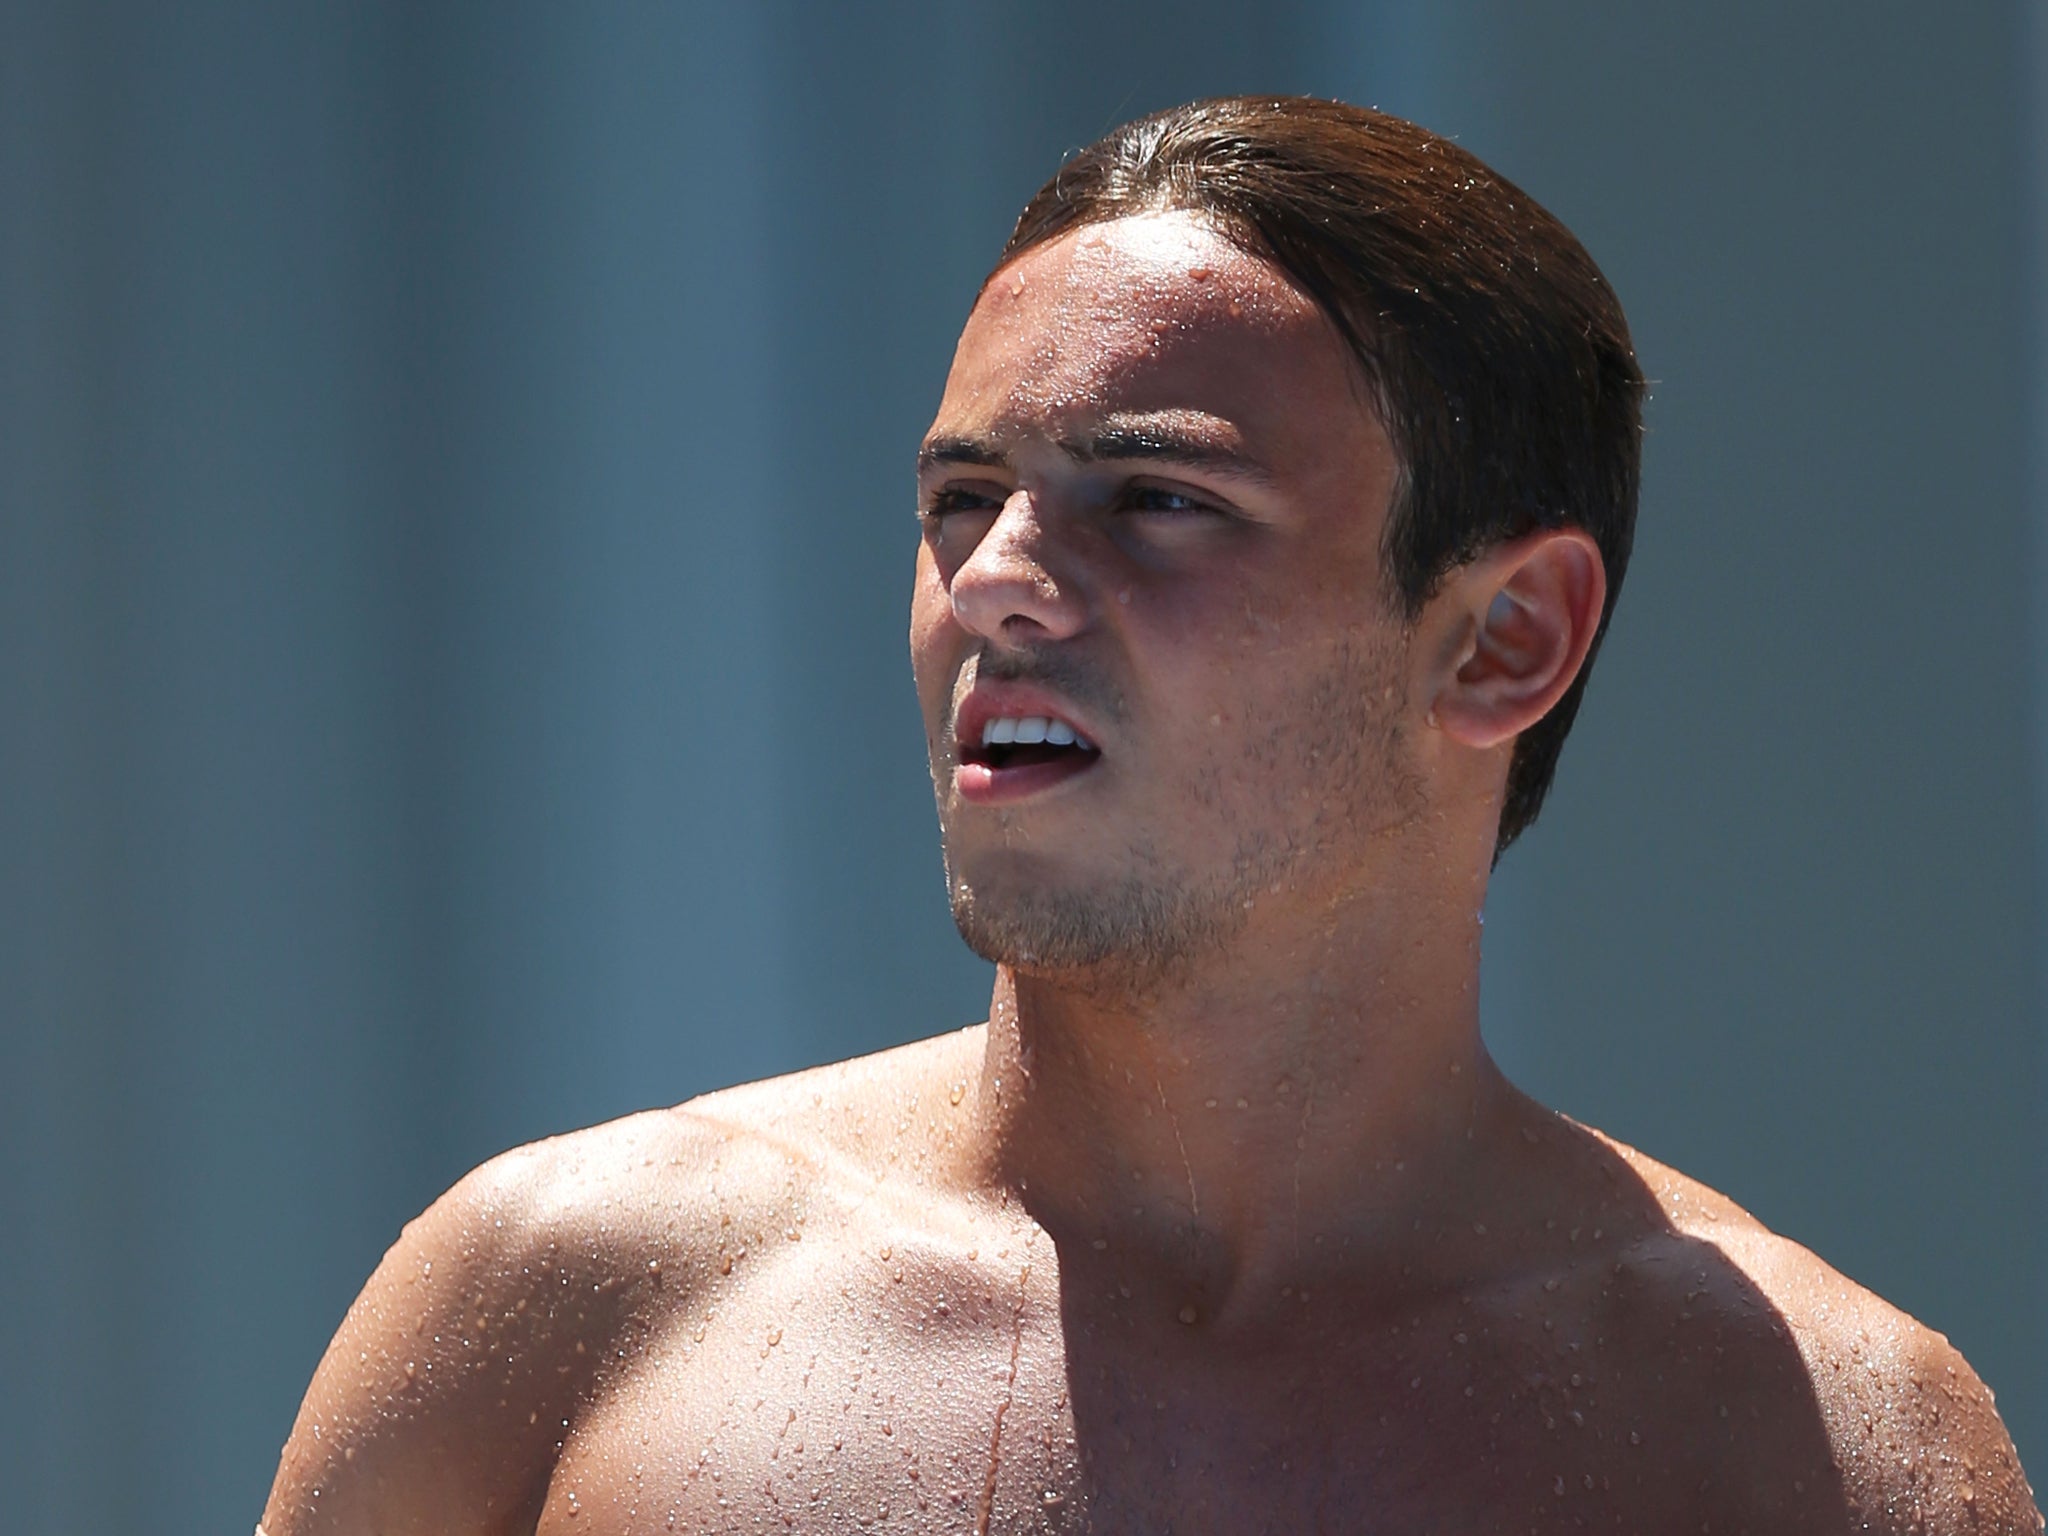 Olympic diver Tom Daley has revealed he is in a relationship with a man